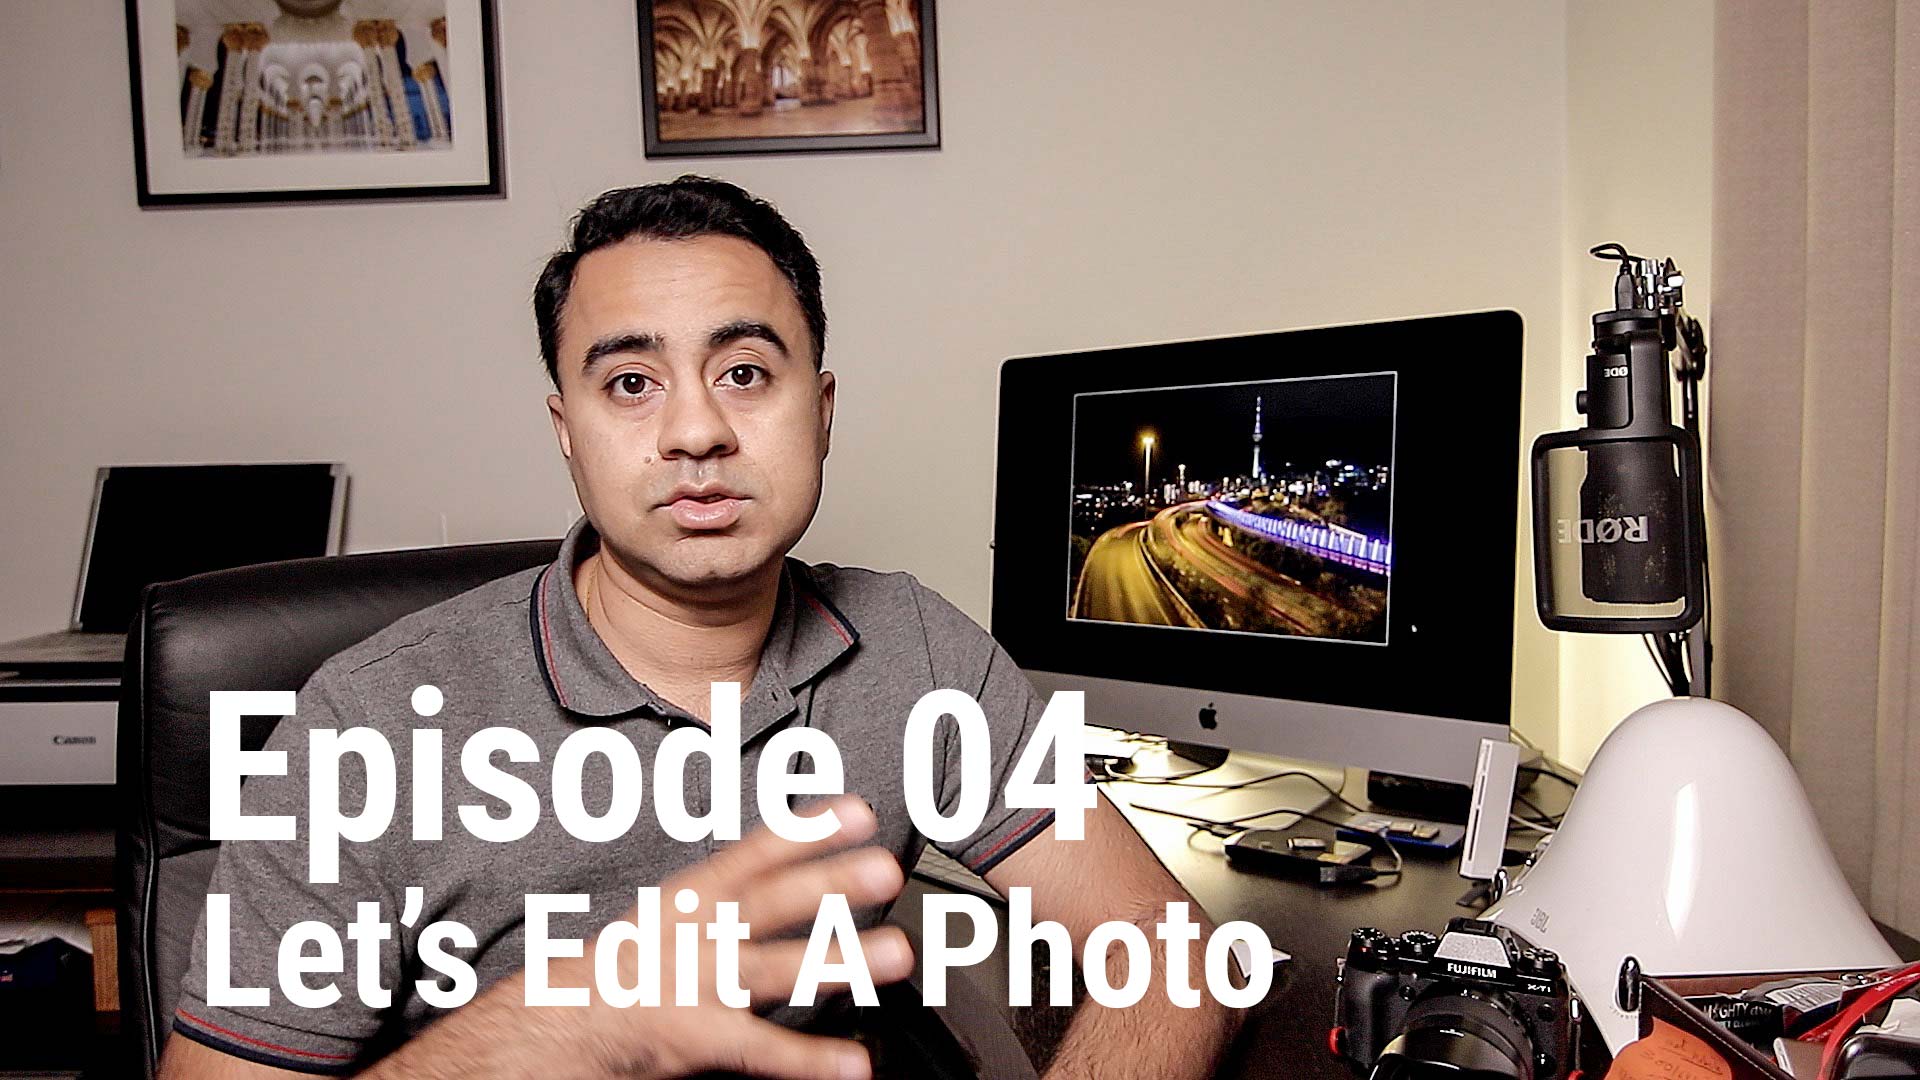 Let’s Edit a Photo – How to Edit Light Trails (Multiple exposures) in Photoshop – LEAP 04